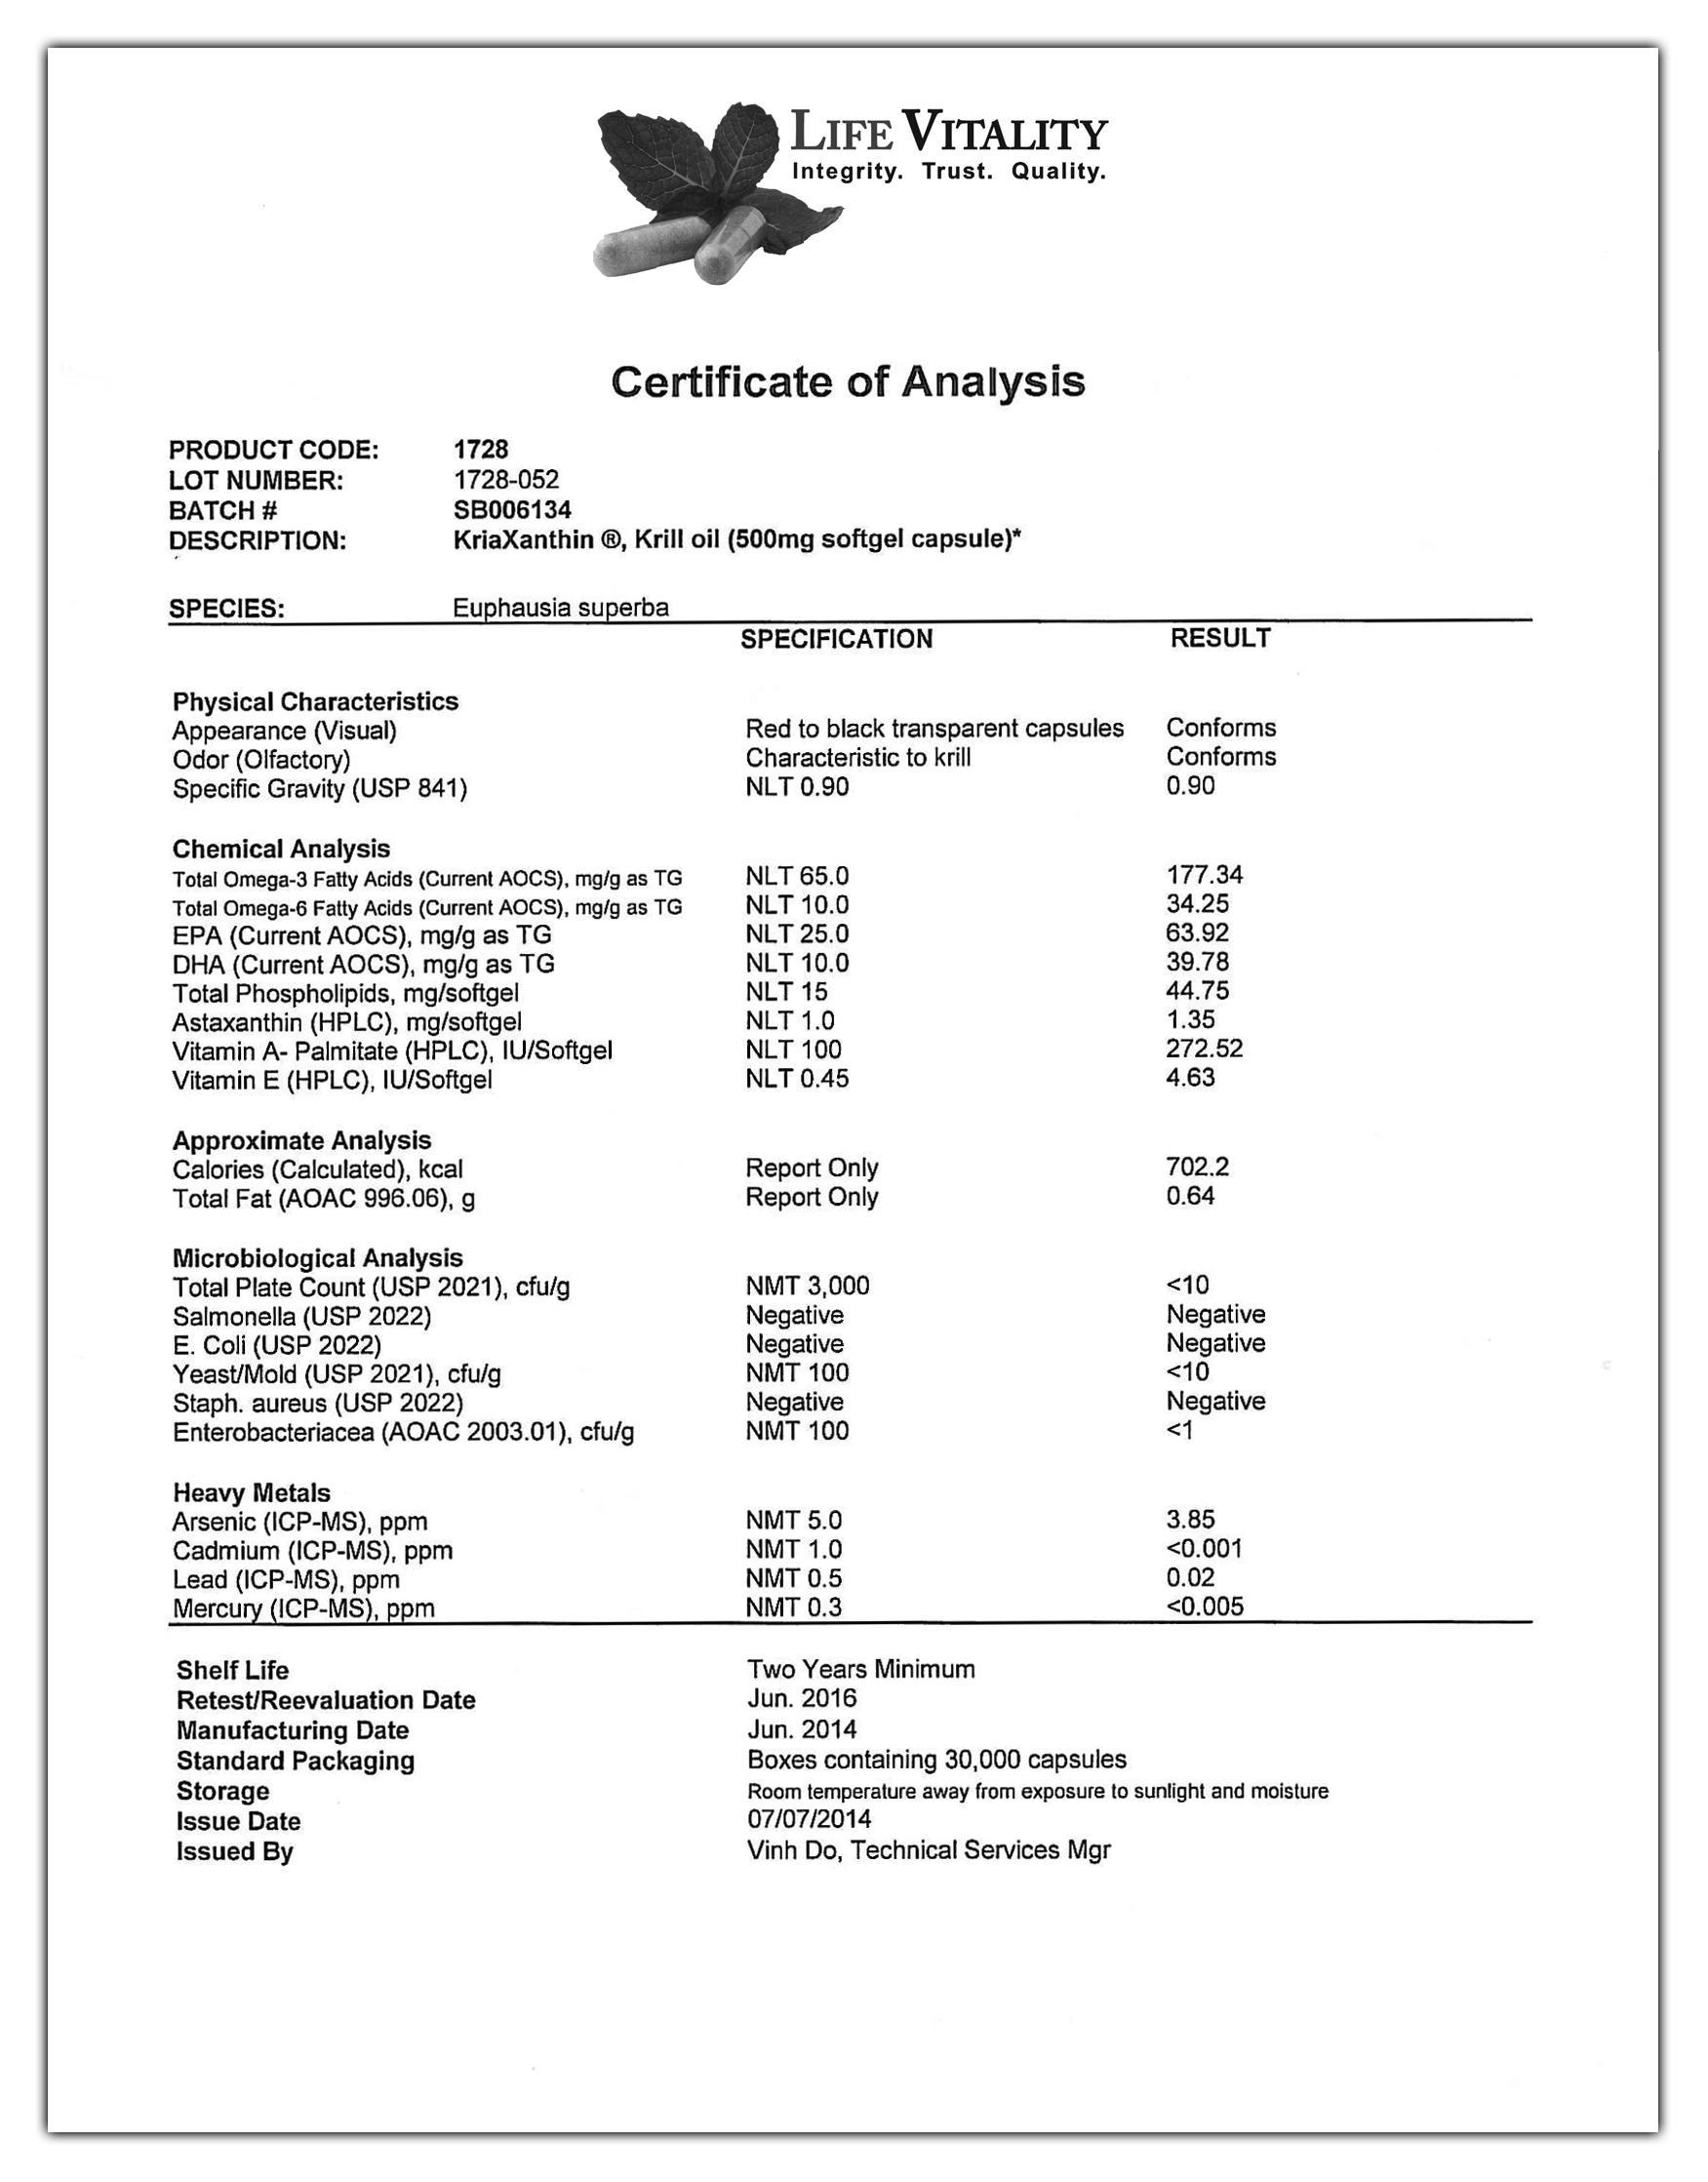 Certificate of Analysis Meaning 